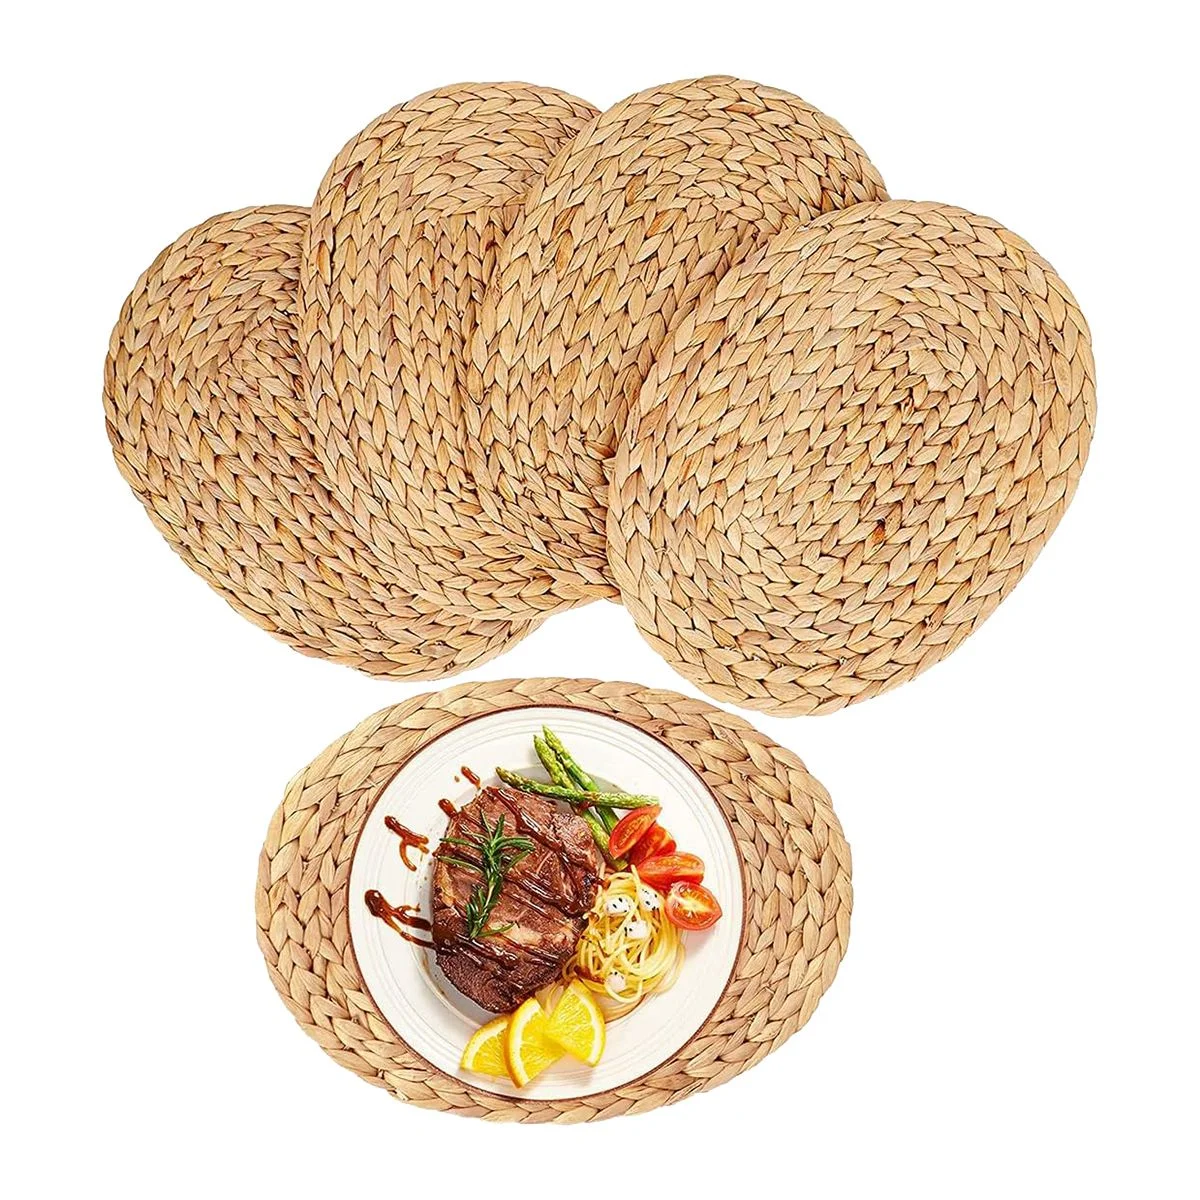 

Oval Woven Placemats, Natural Water Hyacinth Placemats , Straw Braided Rattan Placemats, 12X16 Inches 4Pack